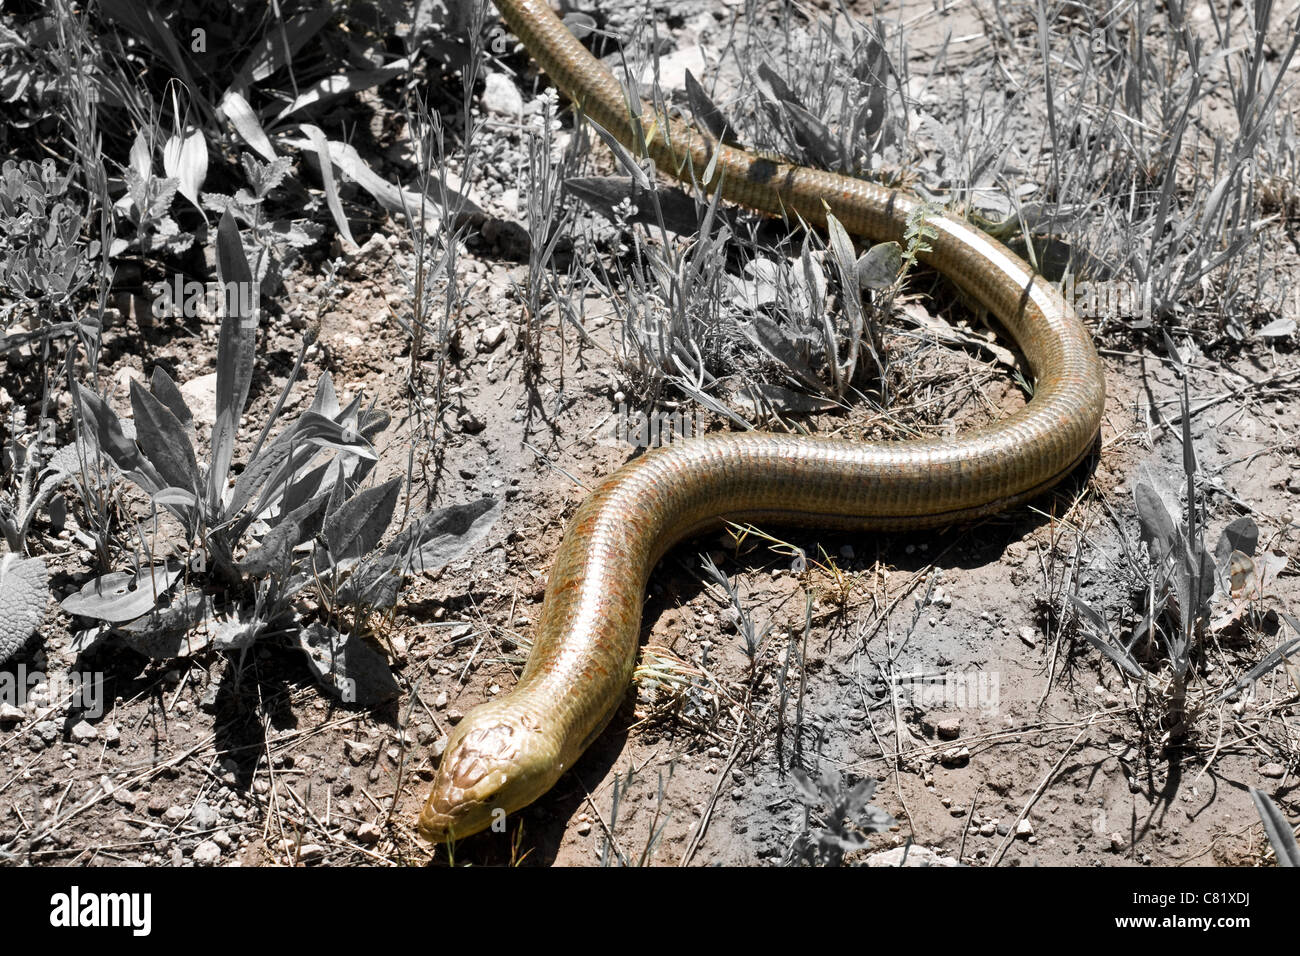 A snake cawing on the ground of the mountains Stock Photo